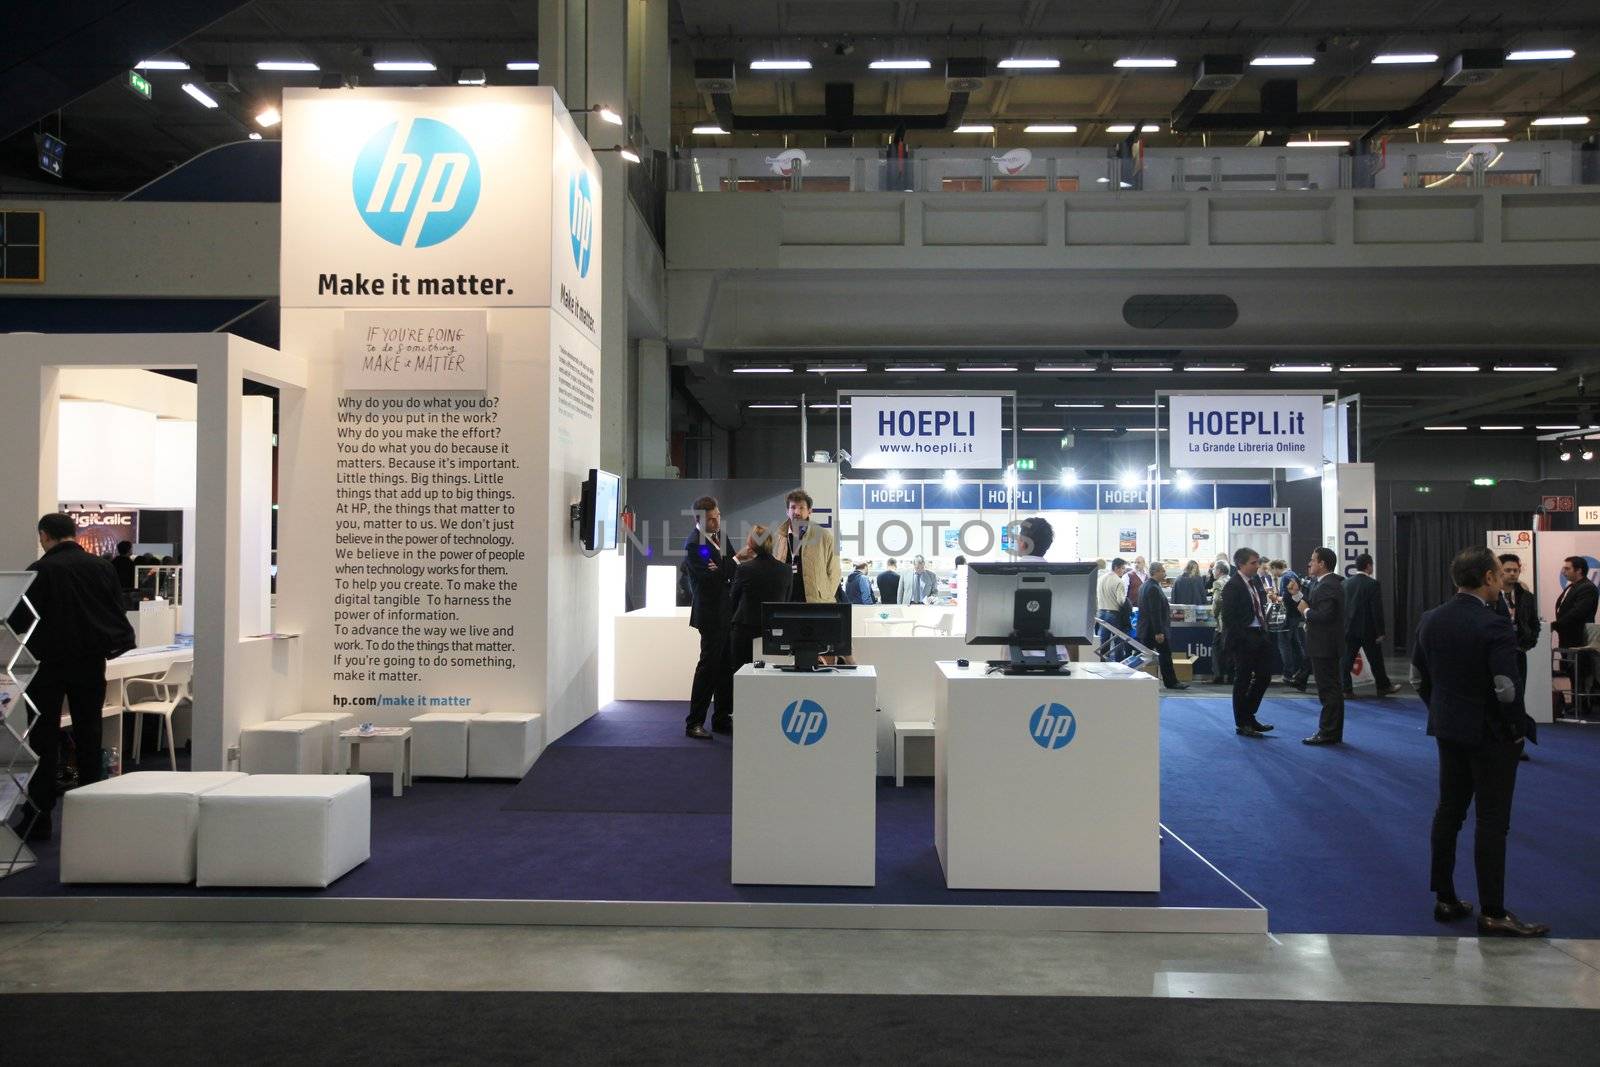 MILAN, ITALY - OCTOBER 17: People visit HP technologies products exhibition area at SMAU, international fair of business intelligence and information technology October 17, 2012 in Milan, Italy.